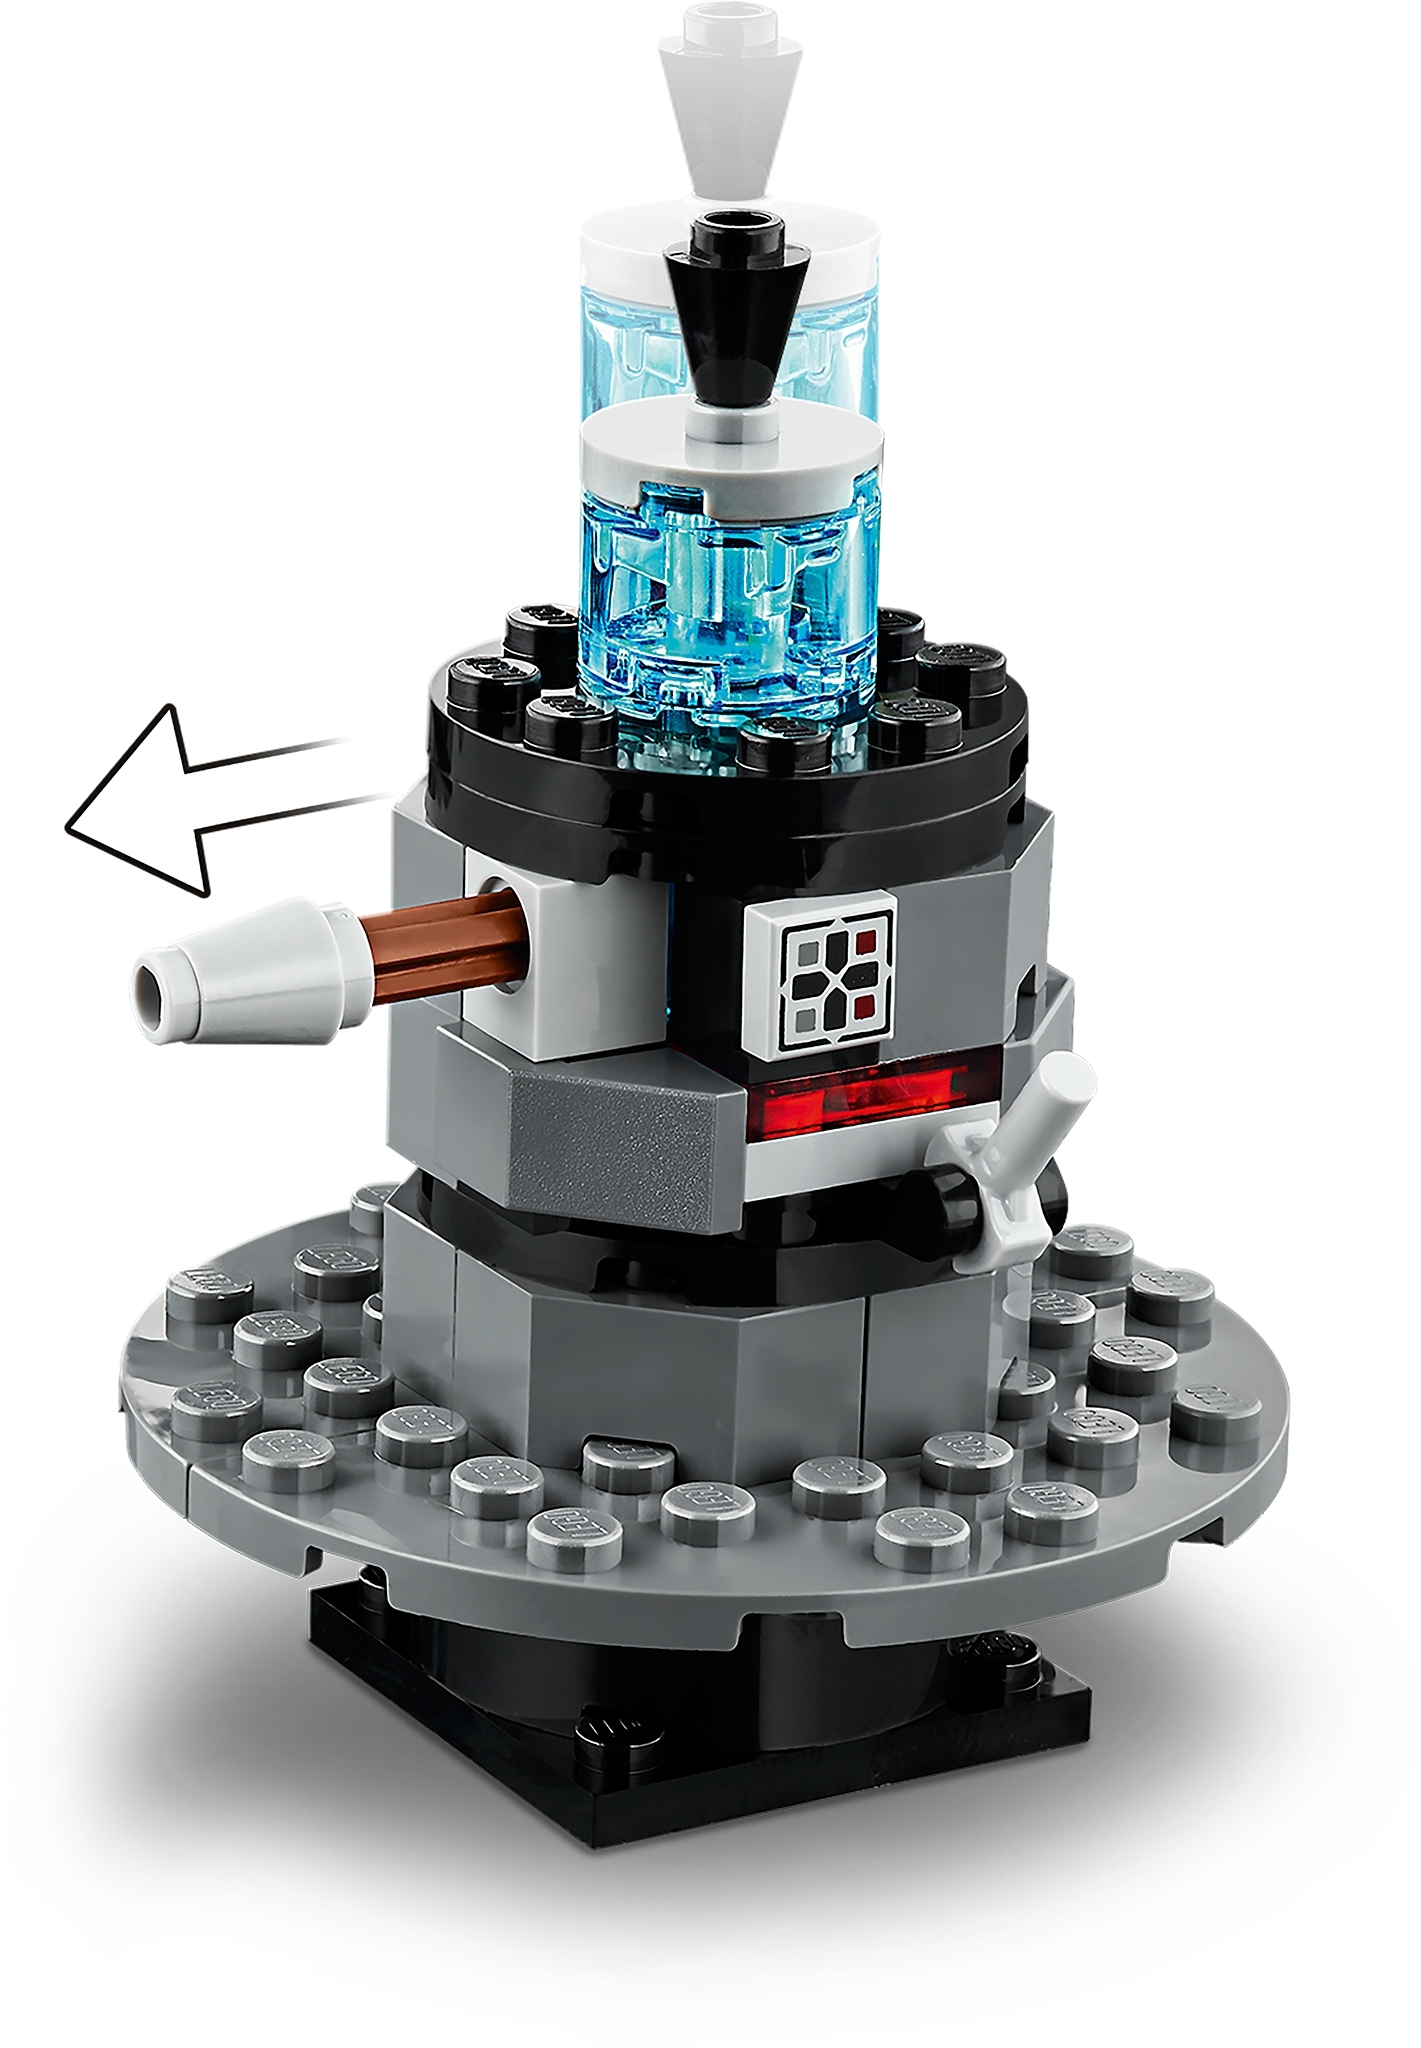 NEW sw1045 with Blaster LEGO Star Wars™ Imperial Gunner from 75246